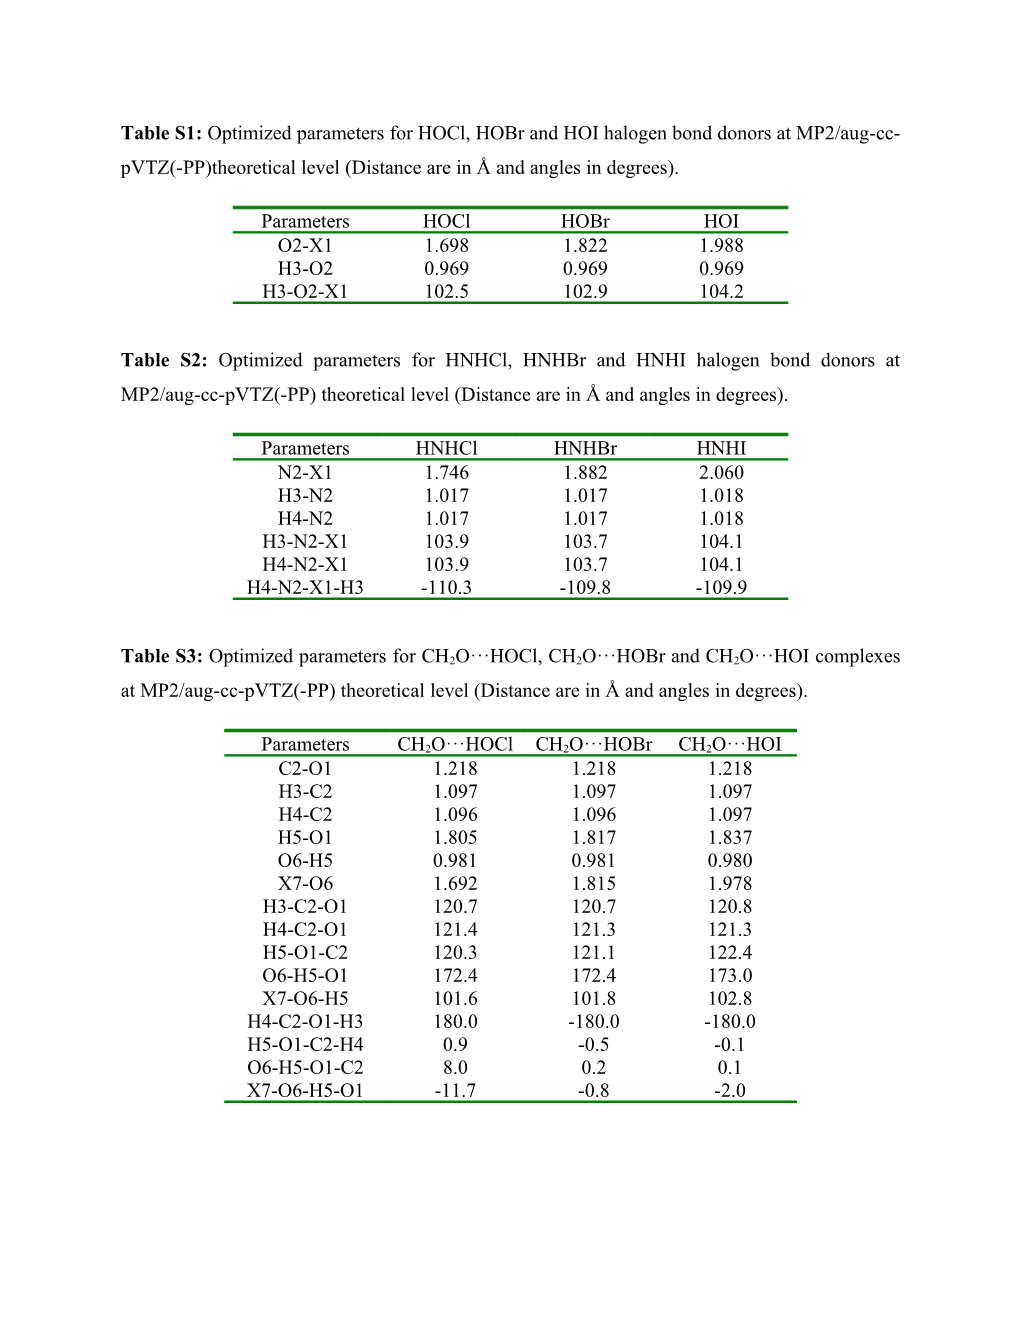 Table S1: Optimized Parameters for Hocl, Hobr and HOI Halogen Bond Donors At